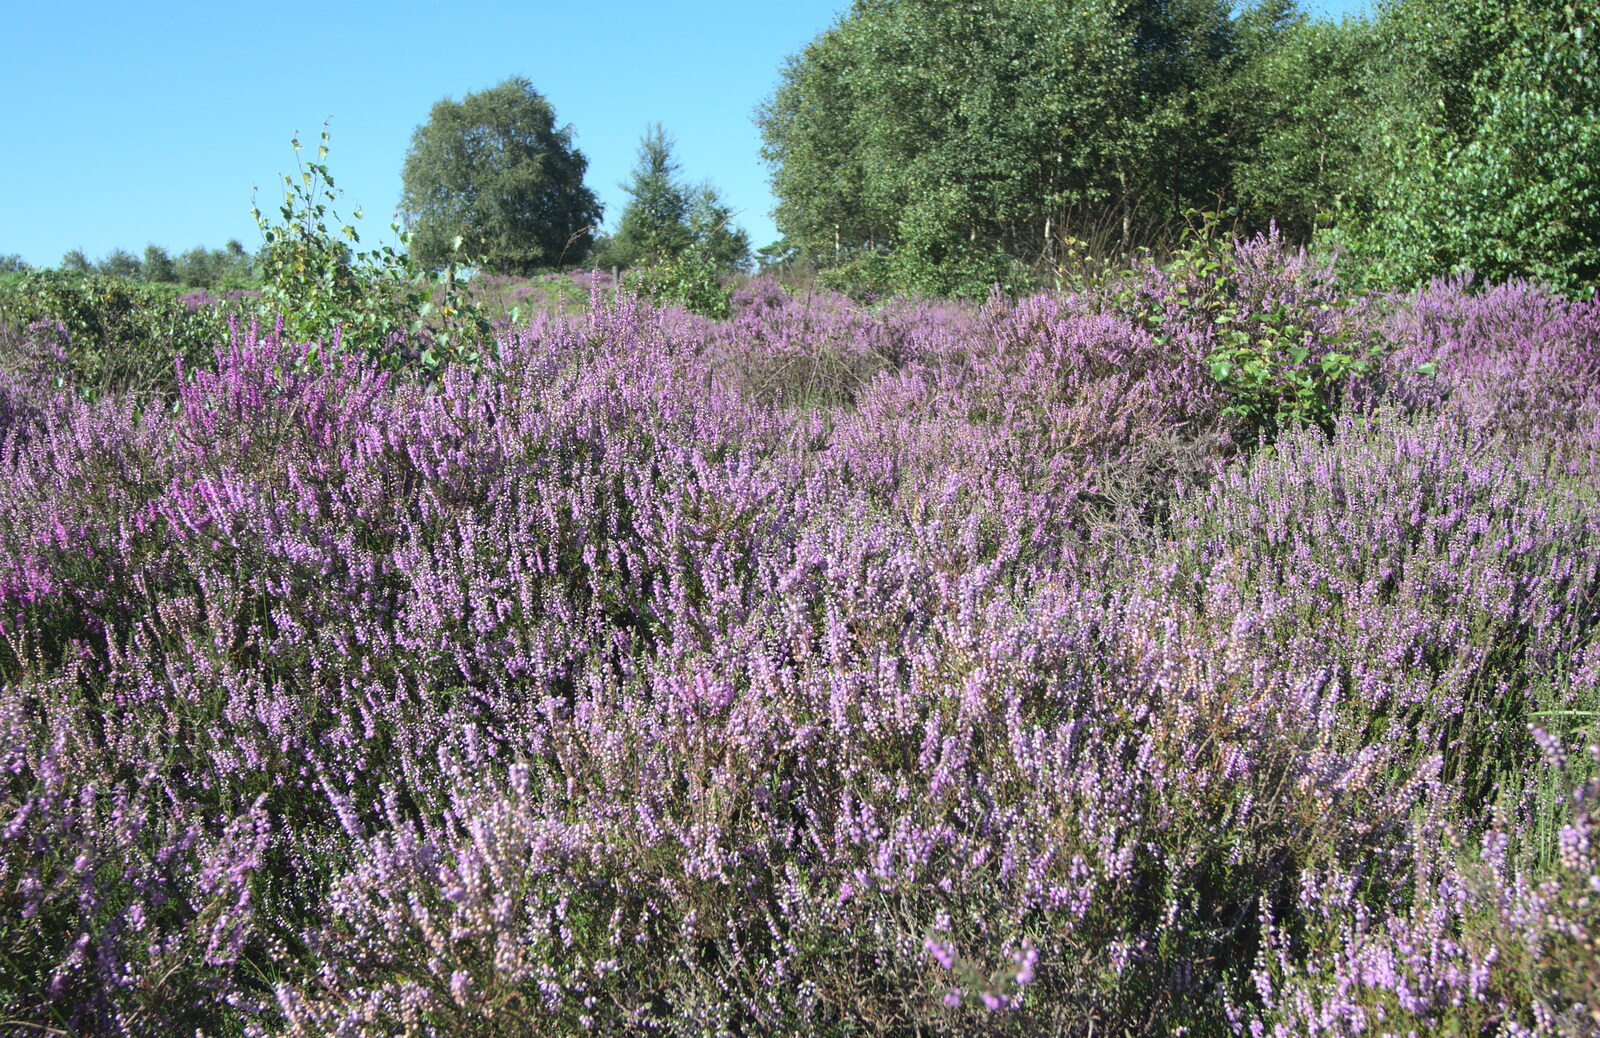 The heather is in bloom from Camping by the Seaside, Cliff House, Dunwich, Suffolk - 15th August 2012